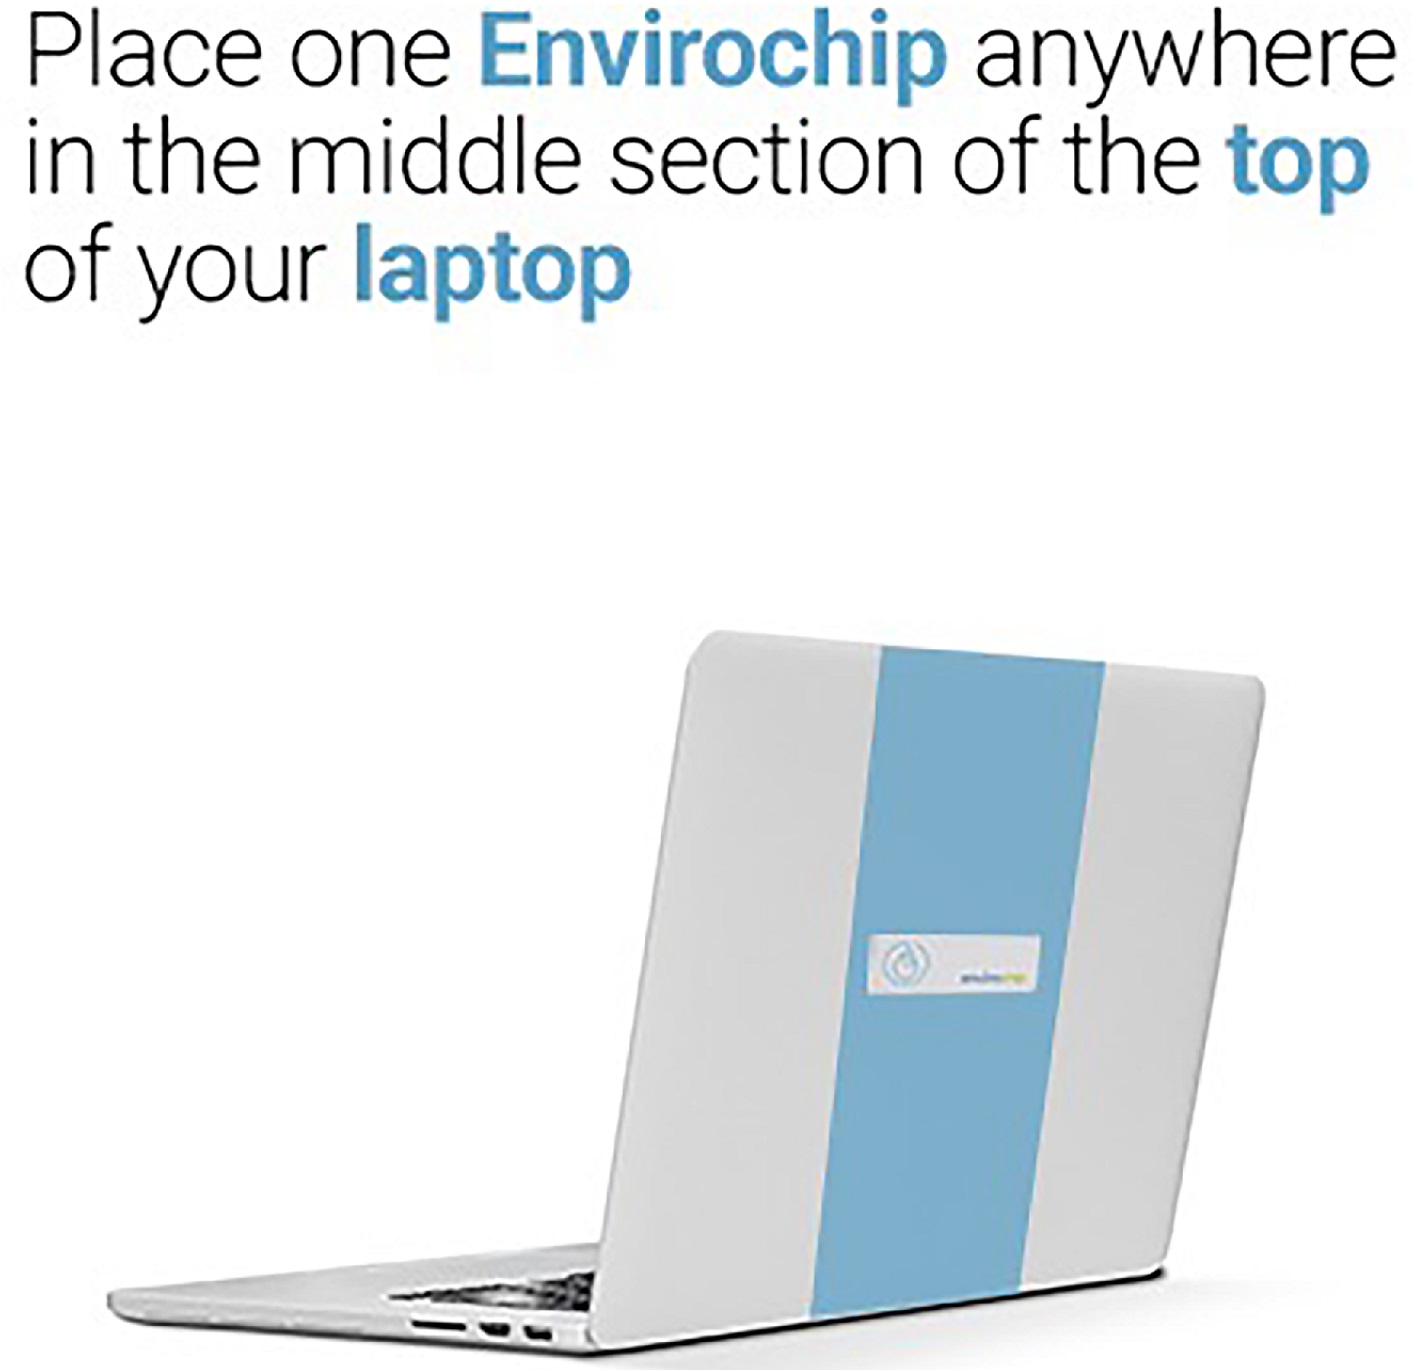 envirochip-clinically-tested-patented-anti-radiation-chip-for-laptop-elements-design-water-silver